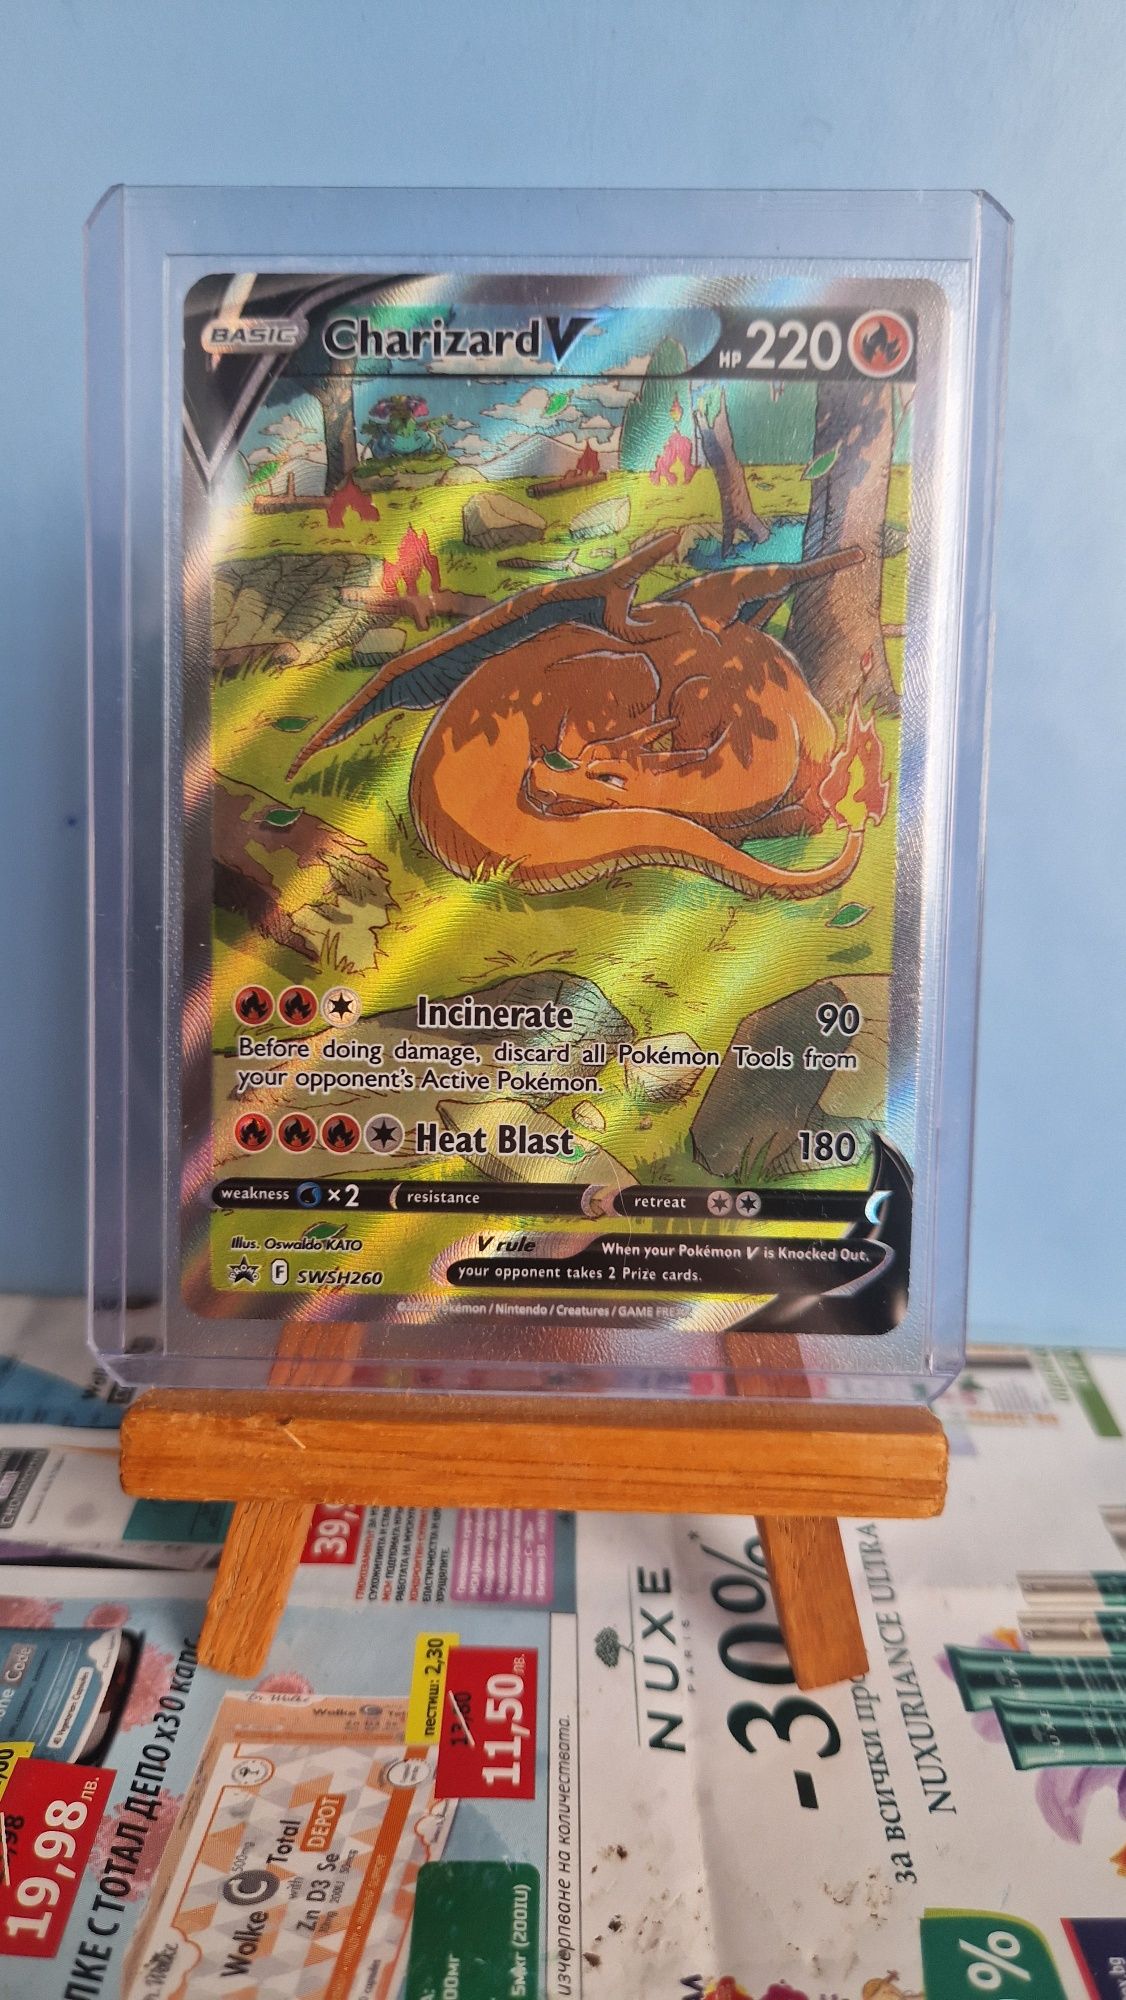 Charizard Pokemon PSA collection cards